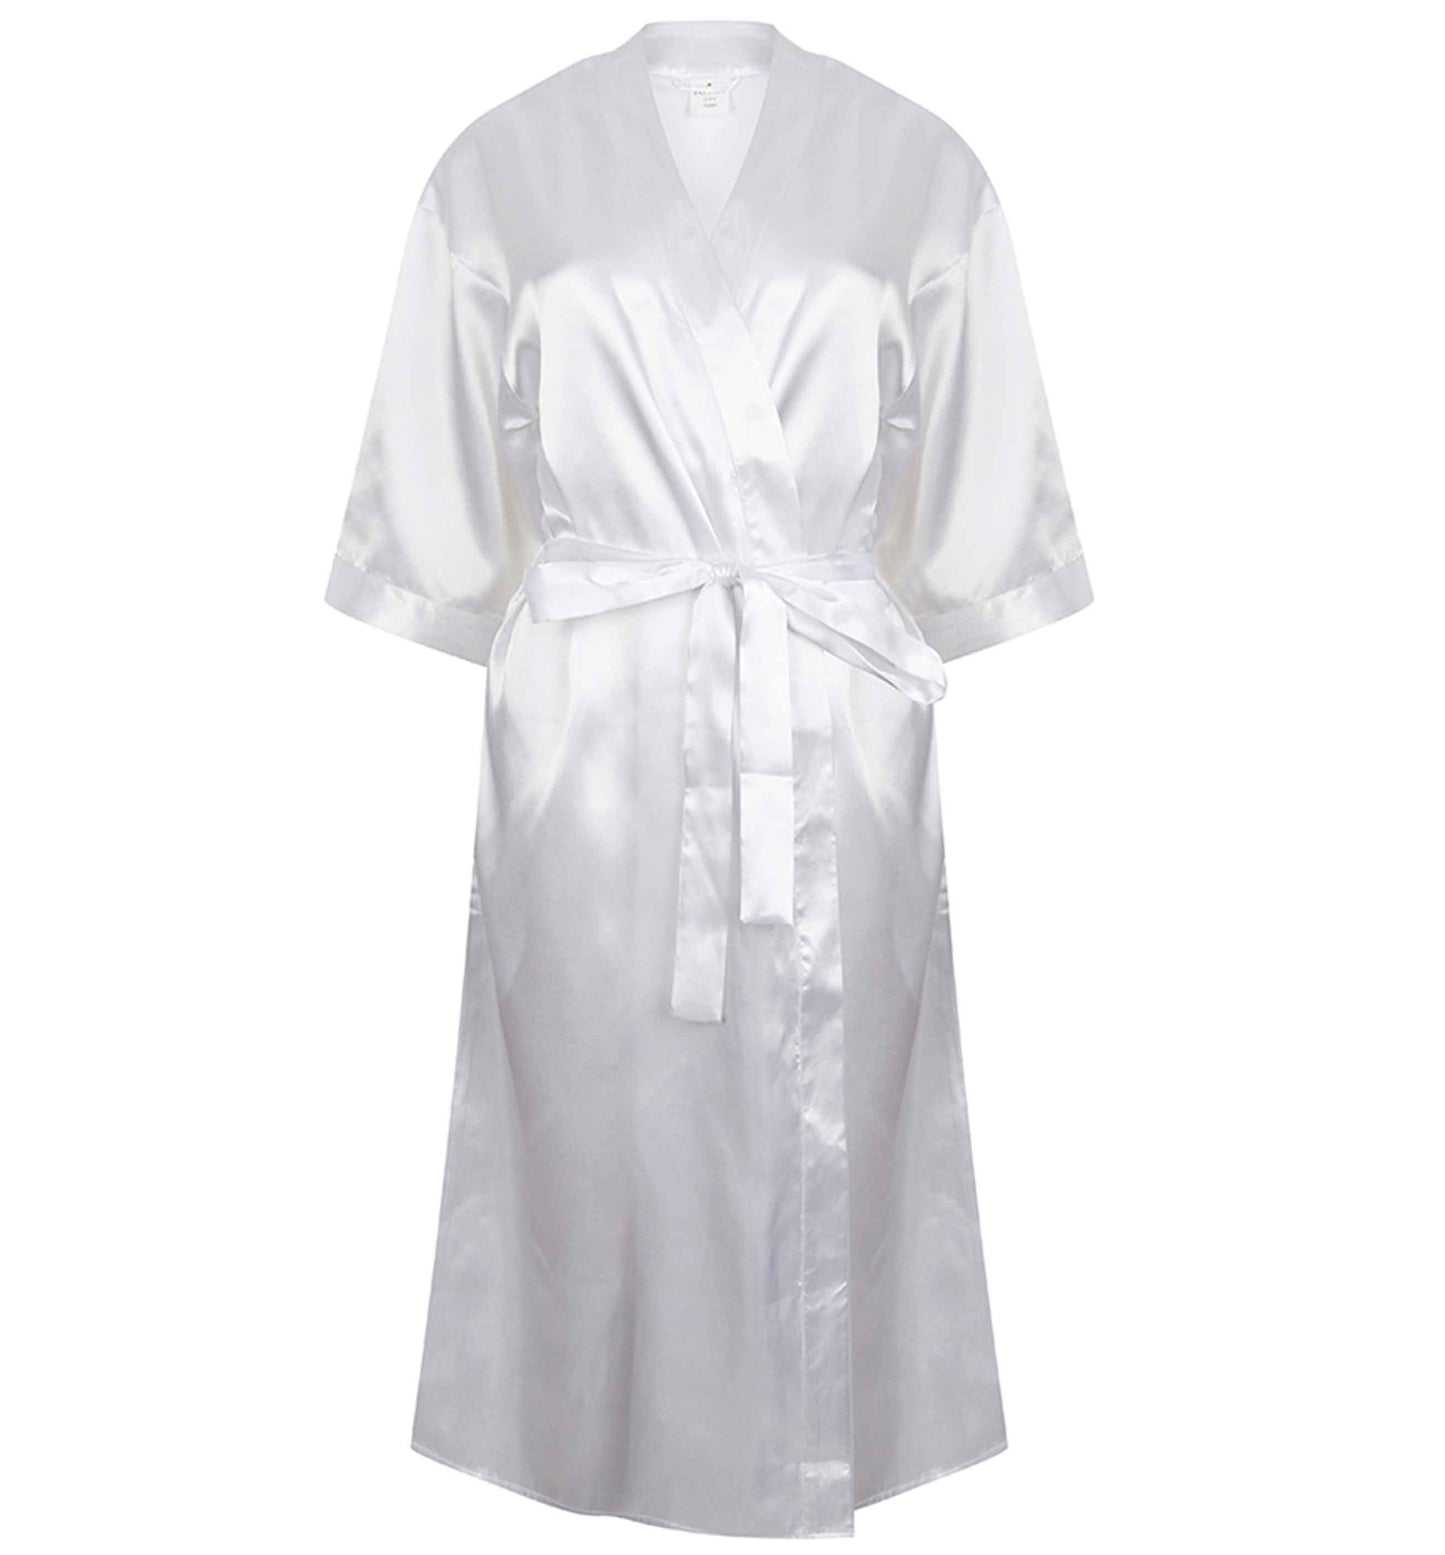 It's only days late but we're finally getting married | 8-18 | Kimono style satin robe | Ladies dressing gown